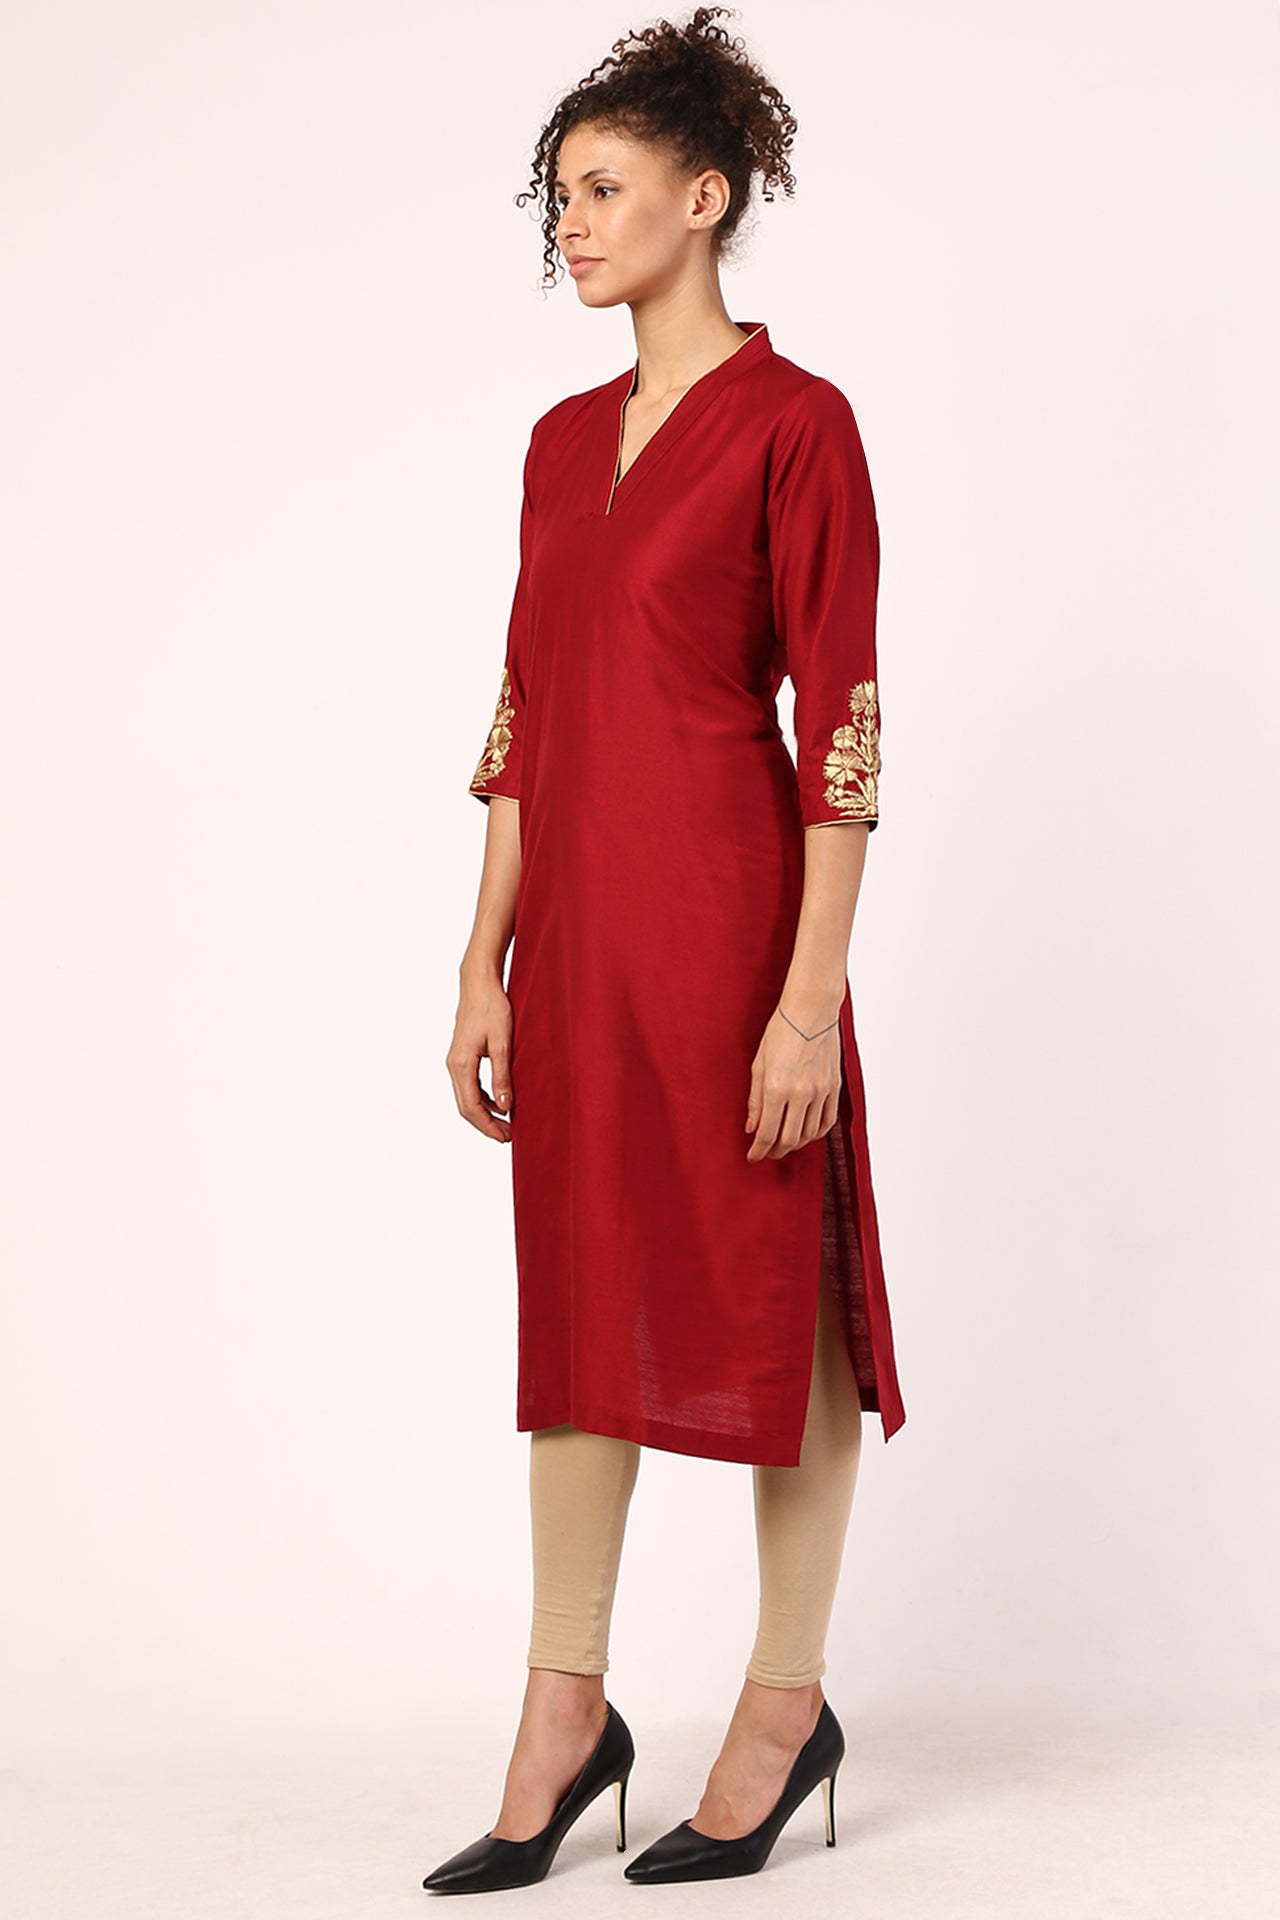 AMODINI RED V-NECK WITH EMBROIDERED SLEEVES WOOLLEN KURTA